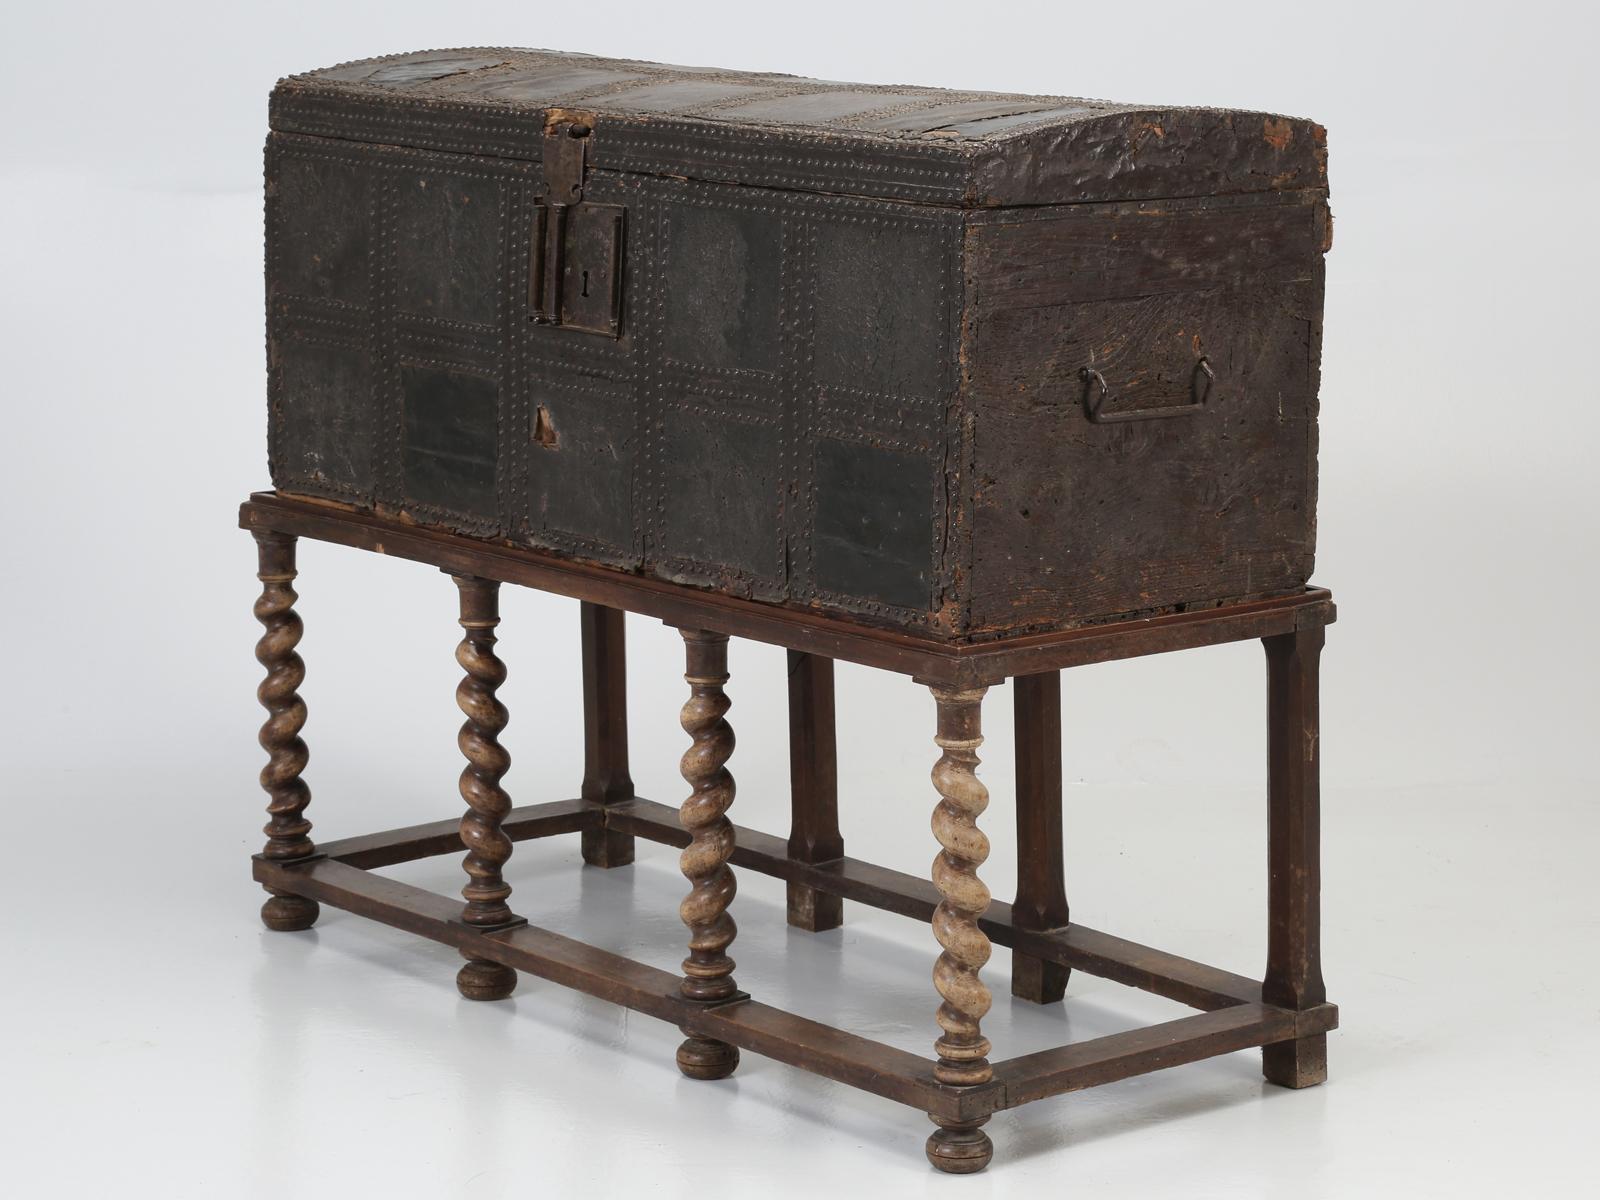 Antique Spanish Leather Trunk and a Barley Twist Stand, circa 1600s 7